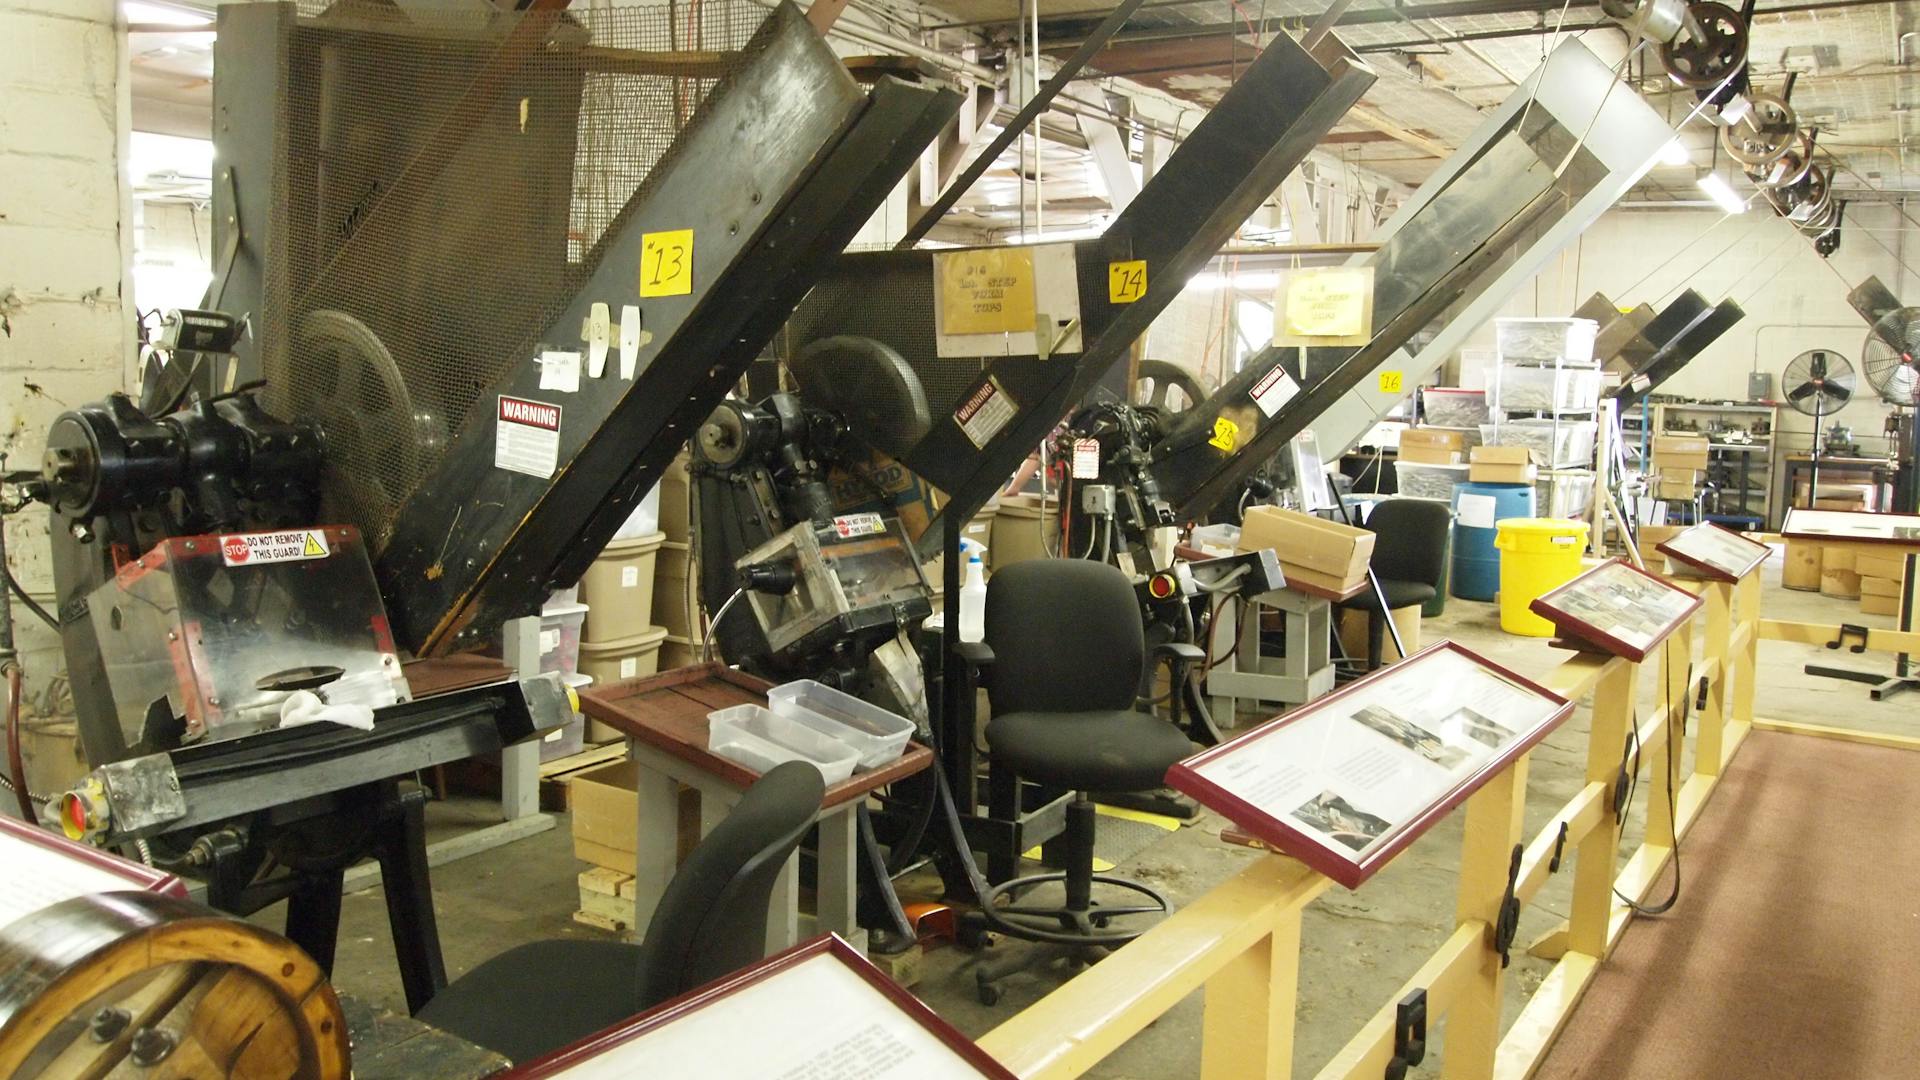 Factory equipment at The Original Kazoo Co. in Eden, New York (photo from Wikimedia Commons)